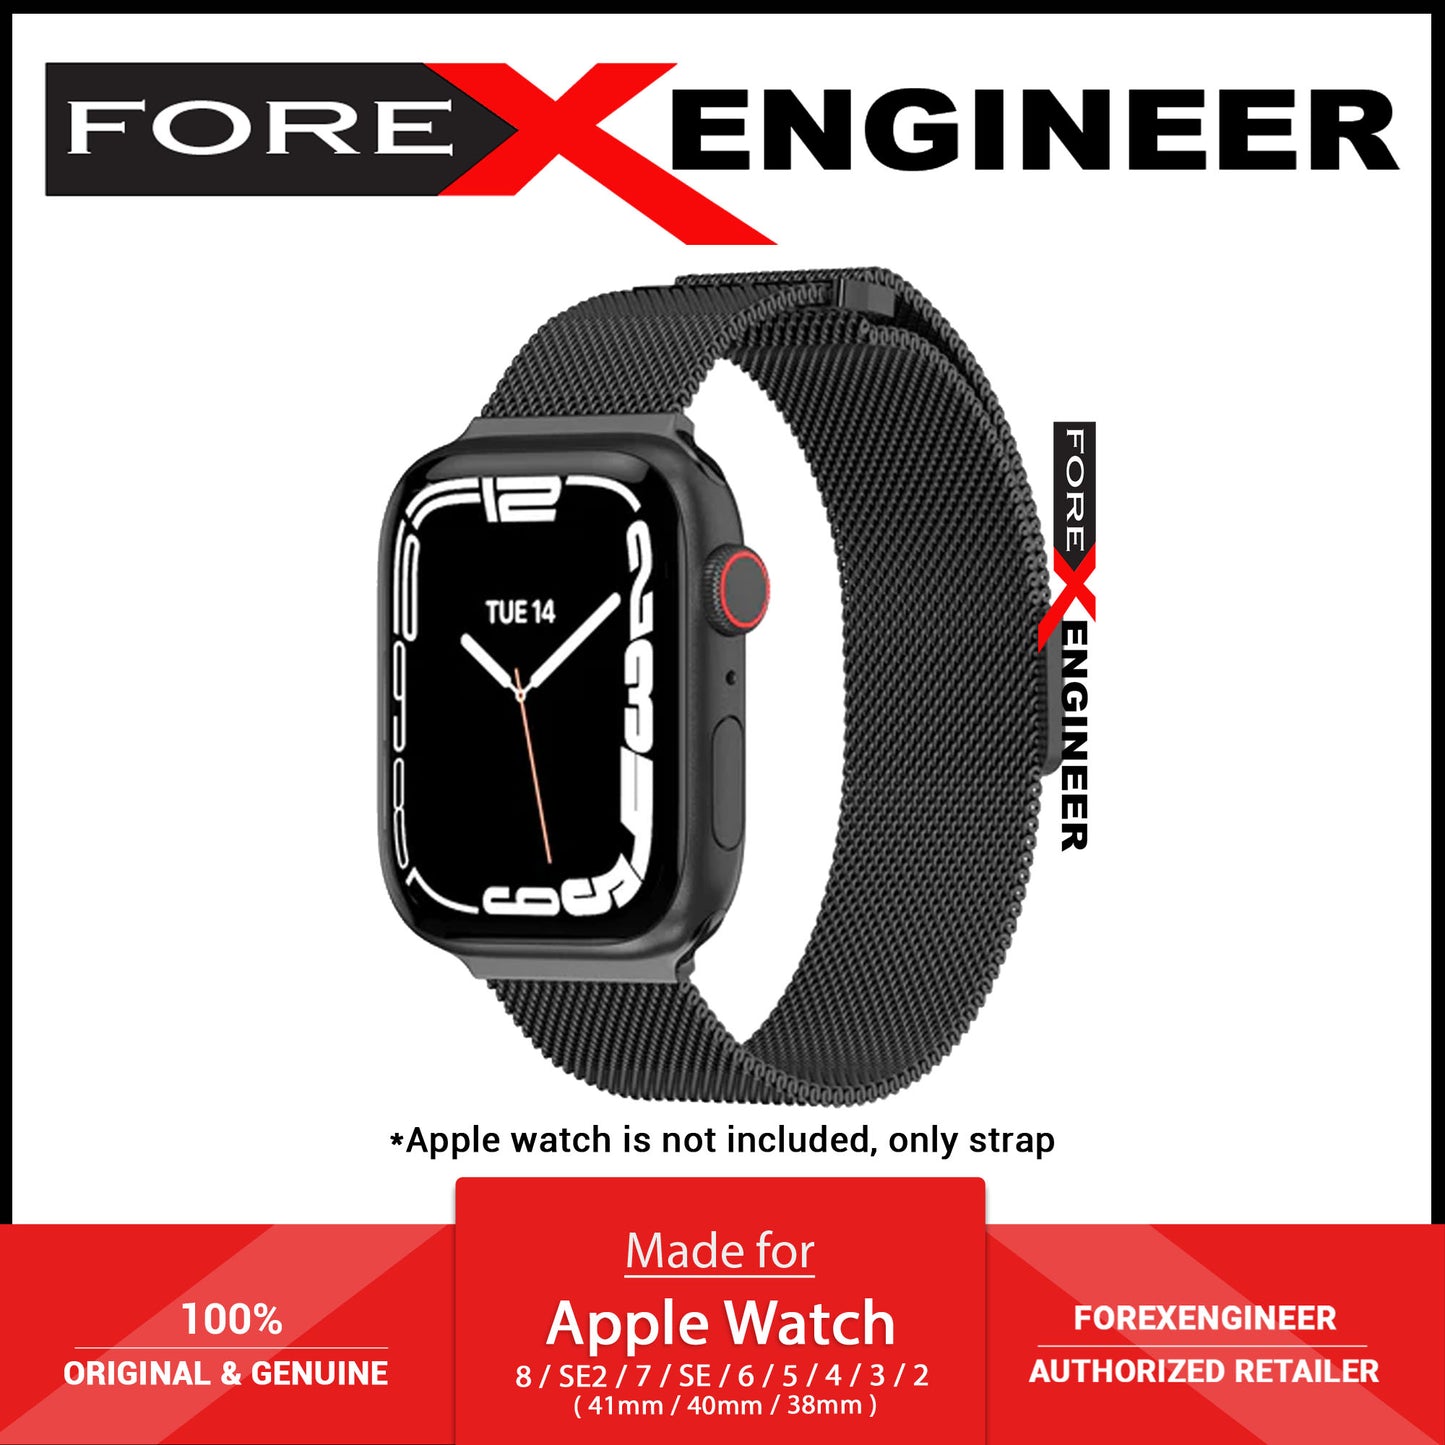 SwitchEasy Mesh Stainless Steel Loop for Apple Watch 41mm - 40mm - 38mm ( 8 - SE2 - 7 - SE - 6 - 5 - 4 - 3 - 2 ) - Black (Barcode : 4895241108280 )